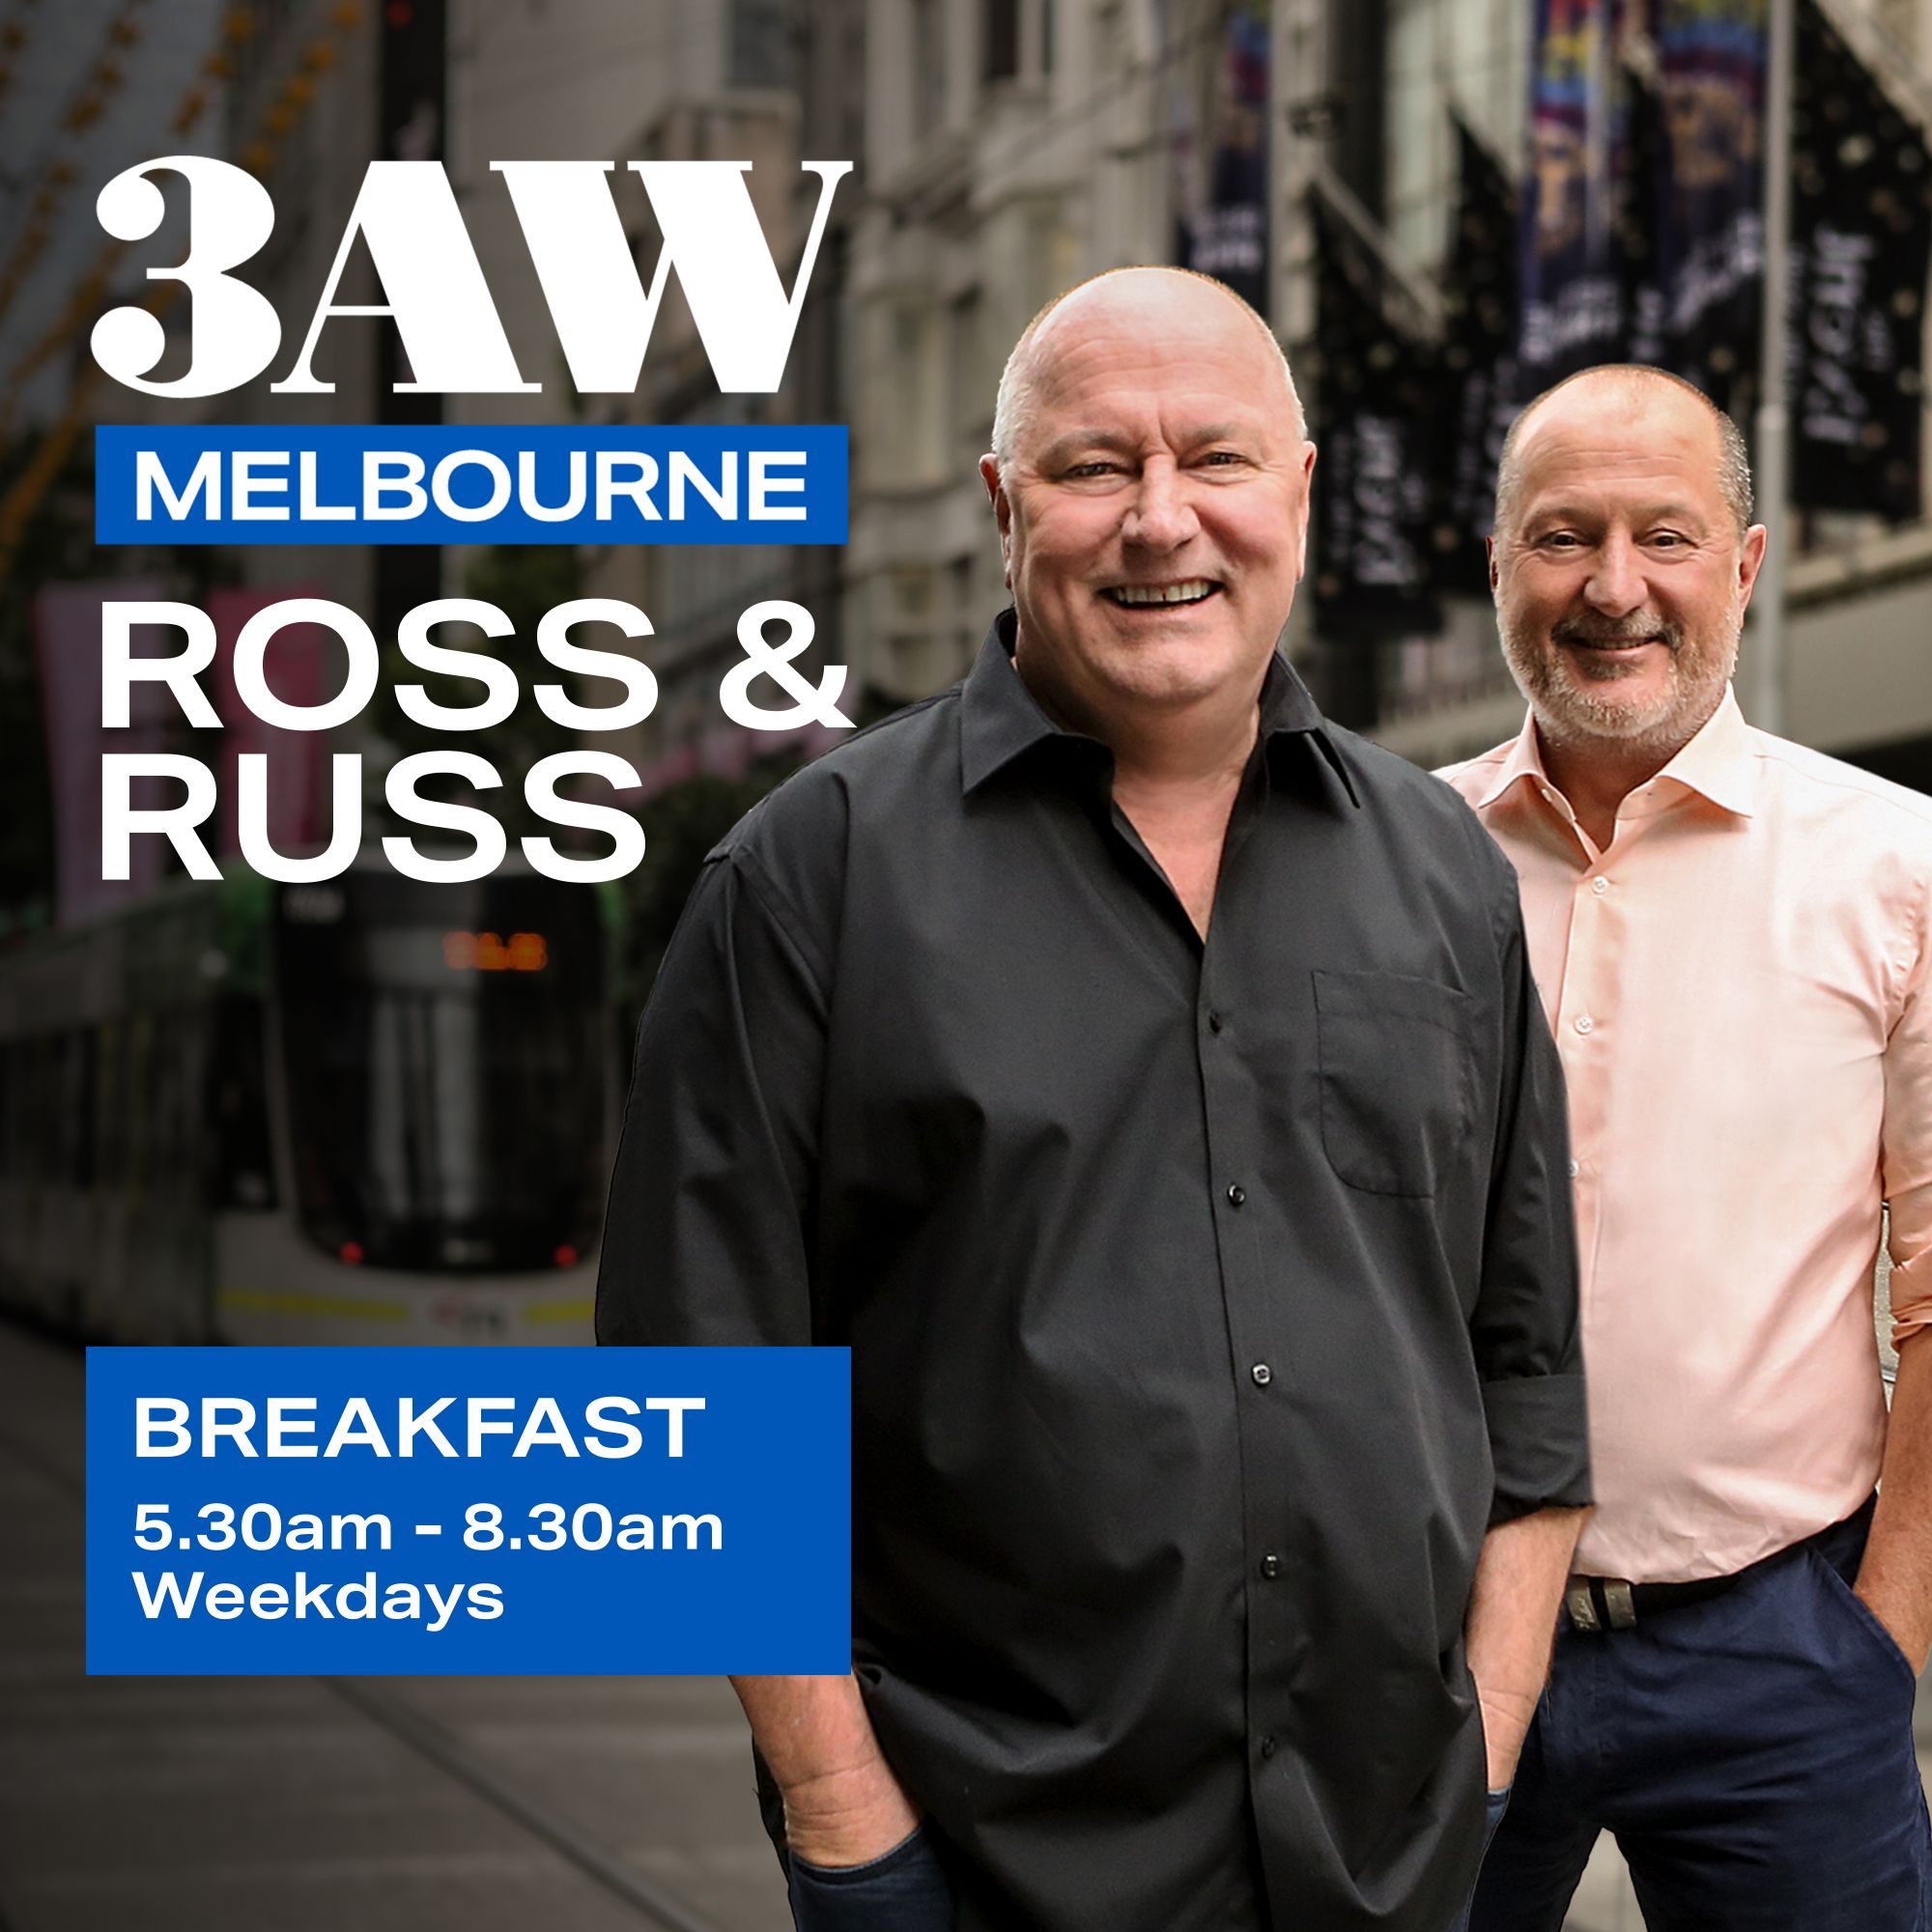 The iconic world event Ross and Russel want to bring to Melbourne!